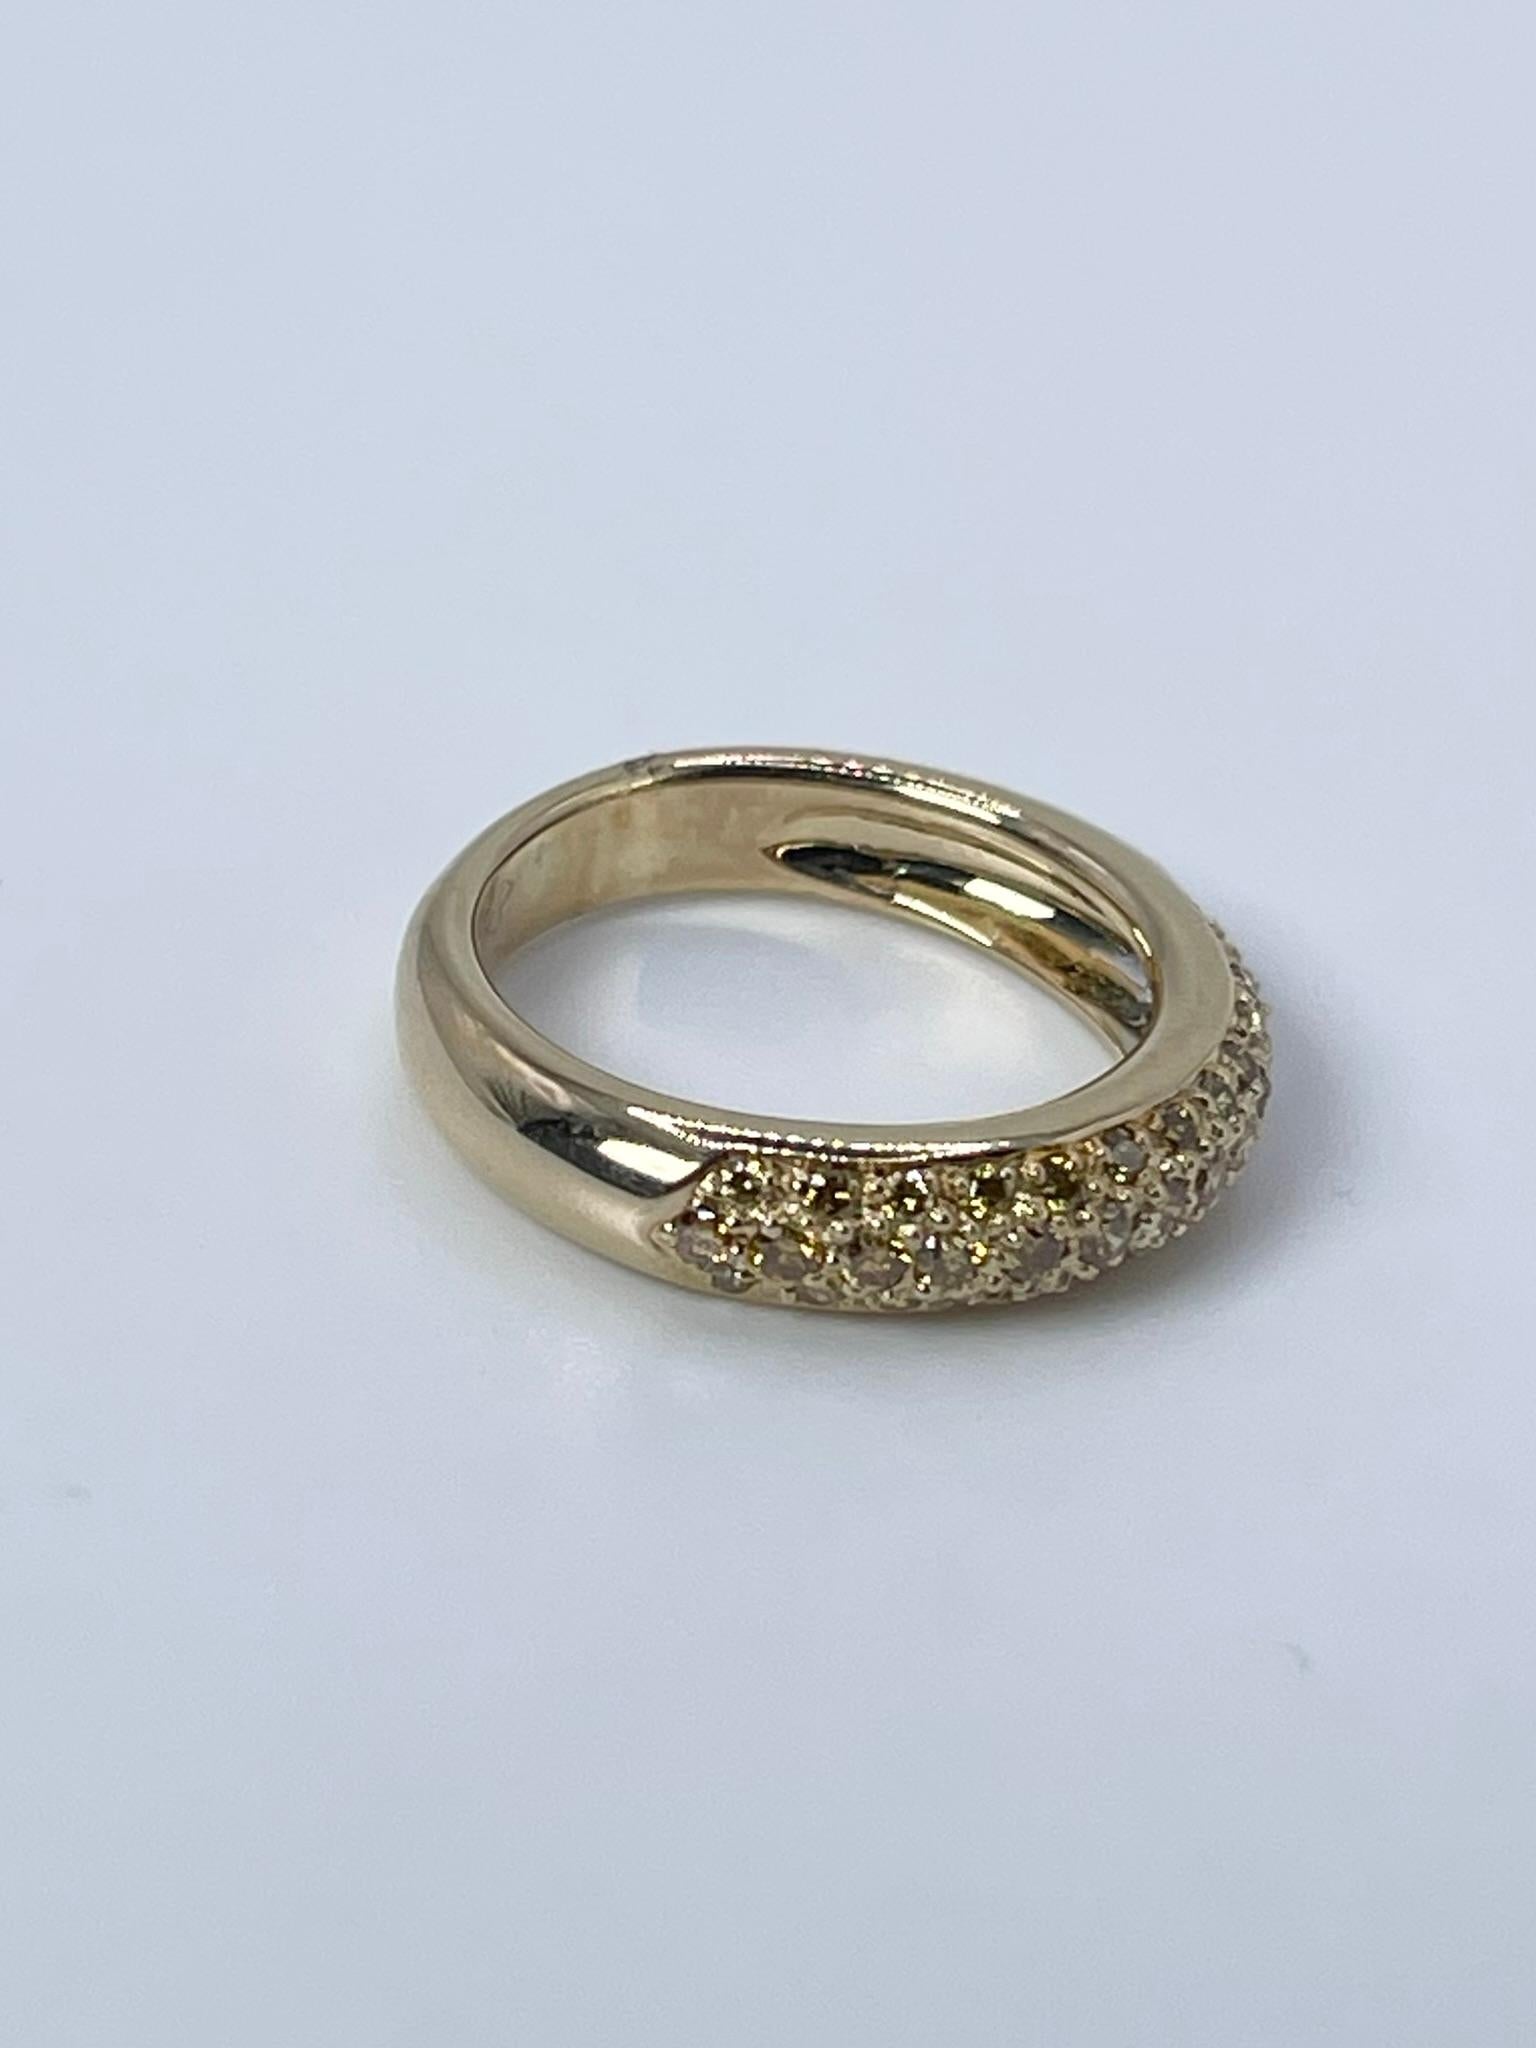 Round Cut Pave Yellow Diamond Ring 18KT 0.60ct Fancy Yellow Diamond Band Marriage Wedding For Sale